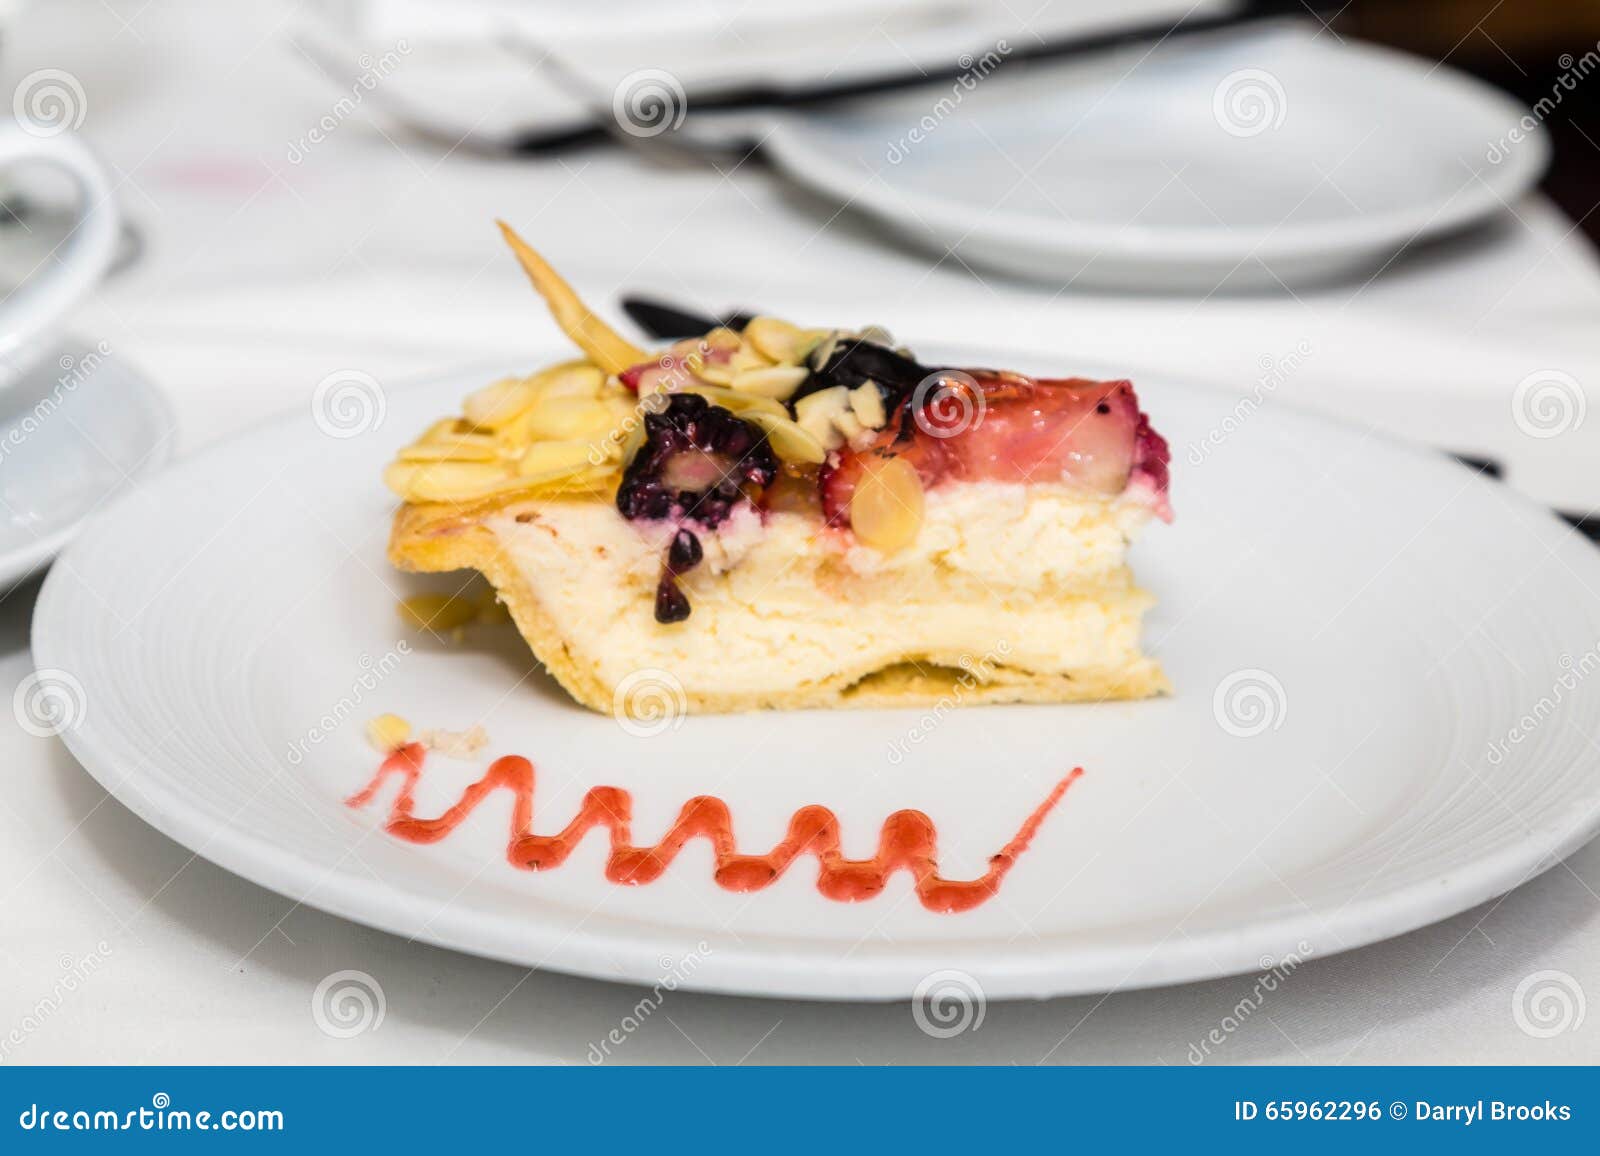 Cheesecake with Fruit Topping Stock Photo - Image of cream, delicious ...